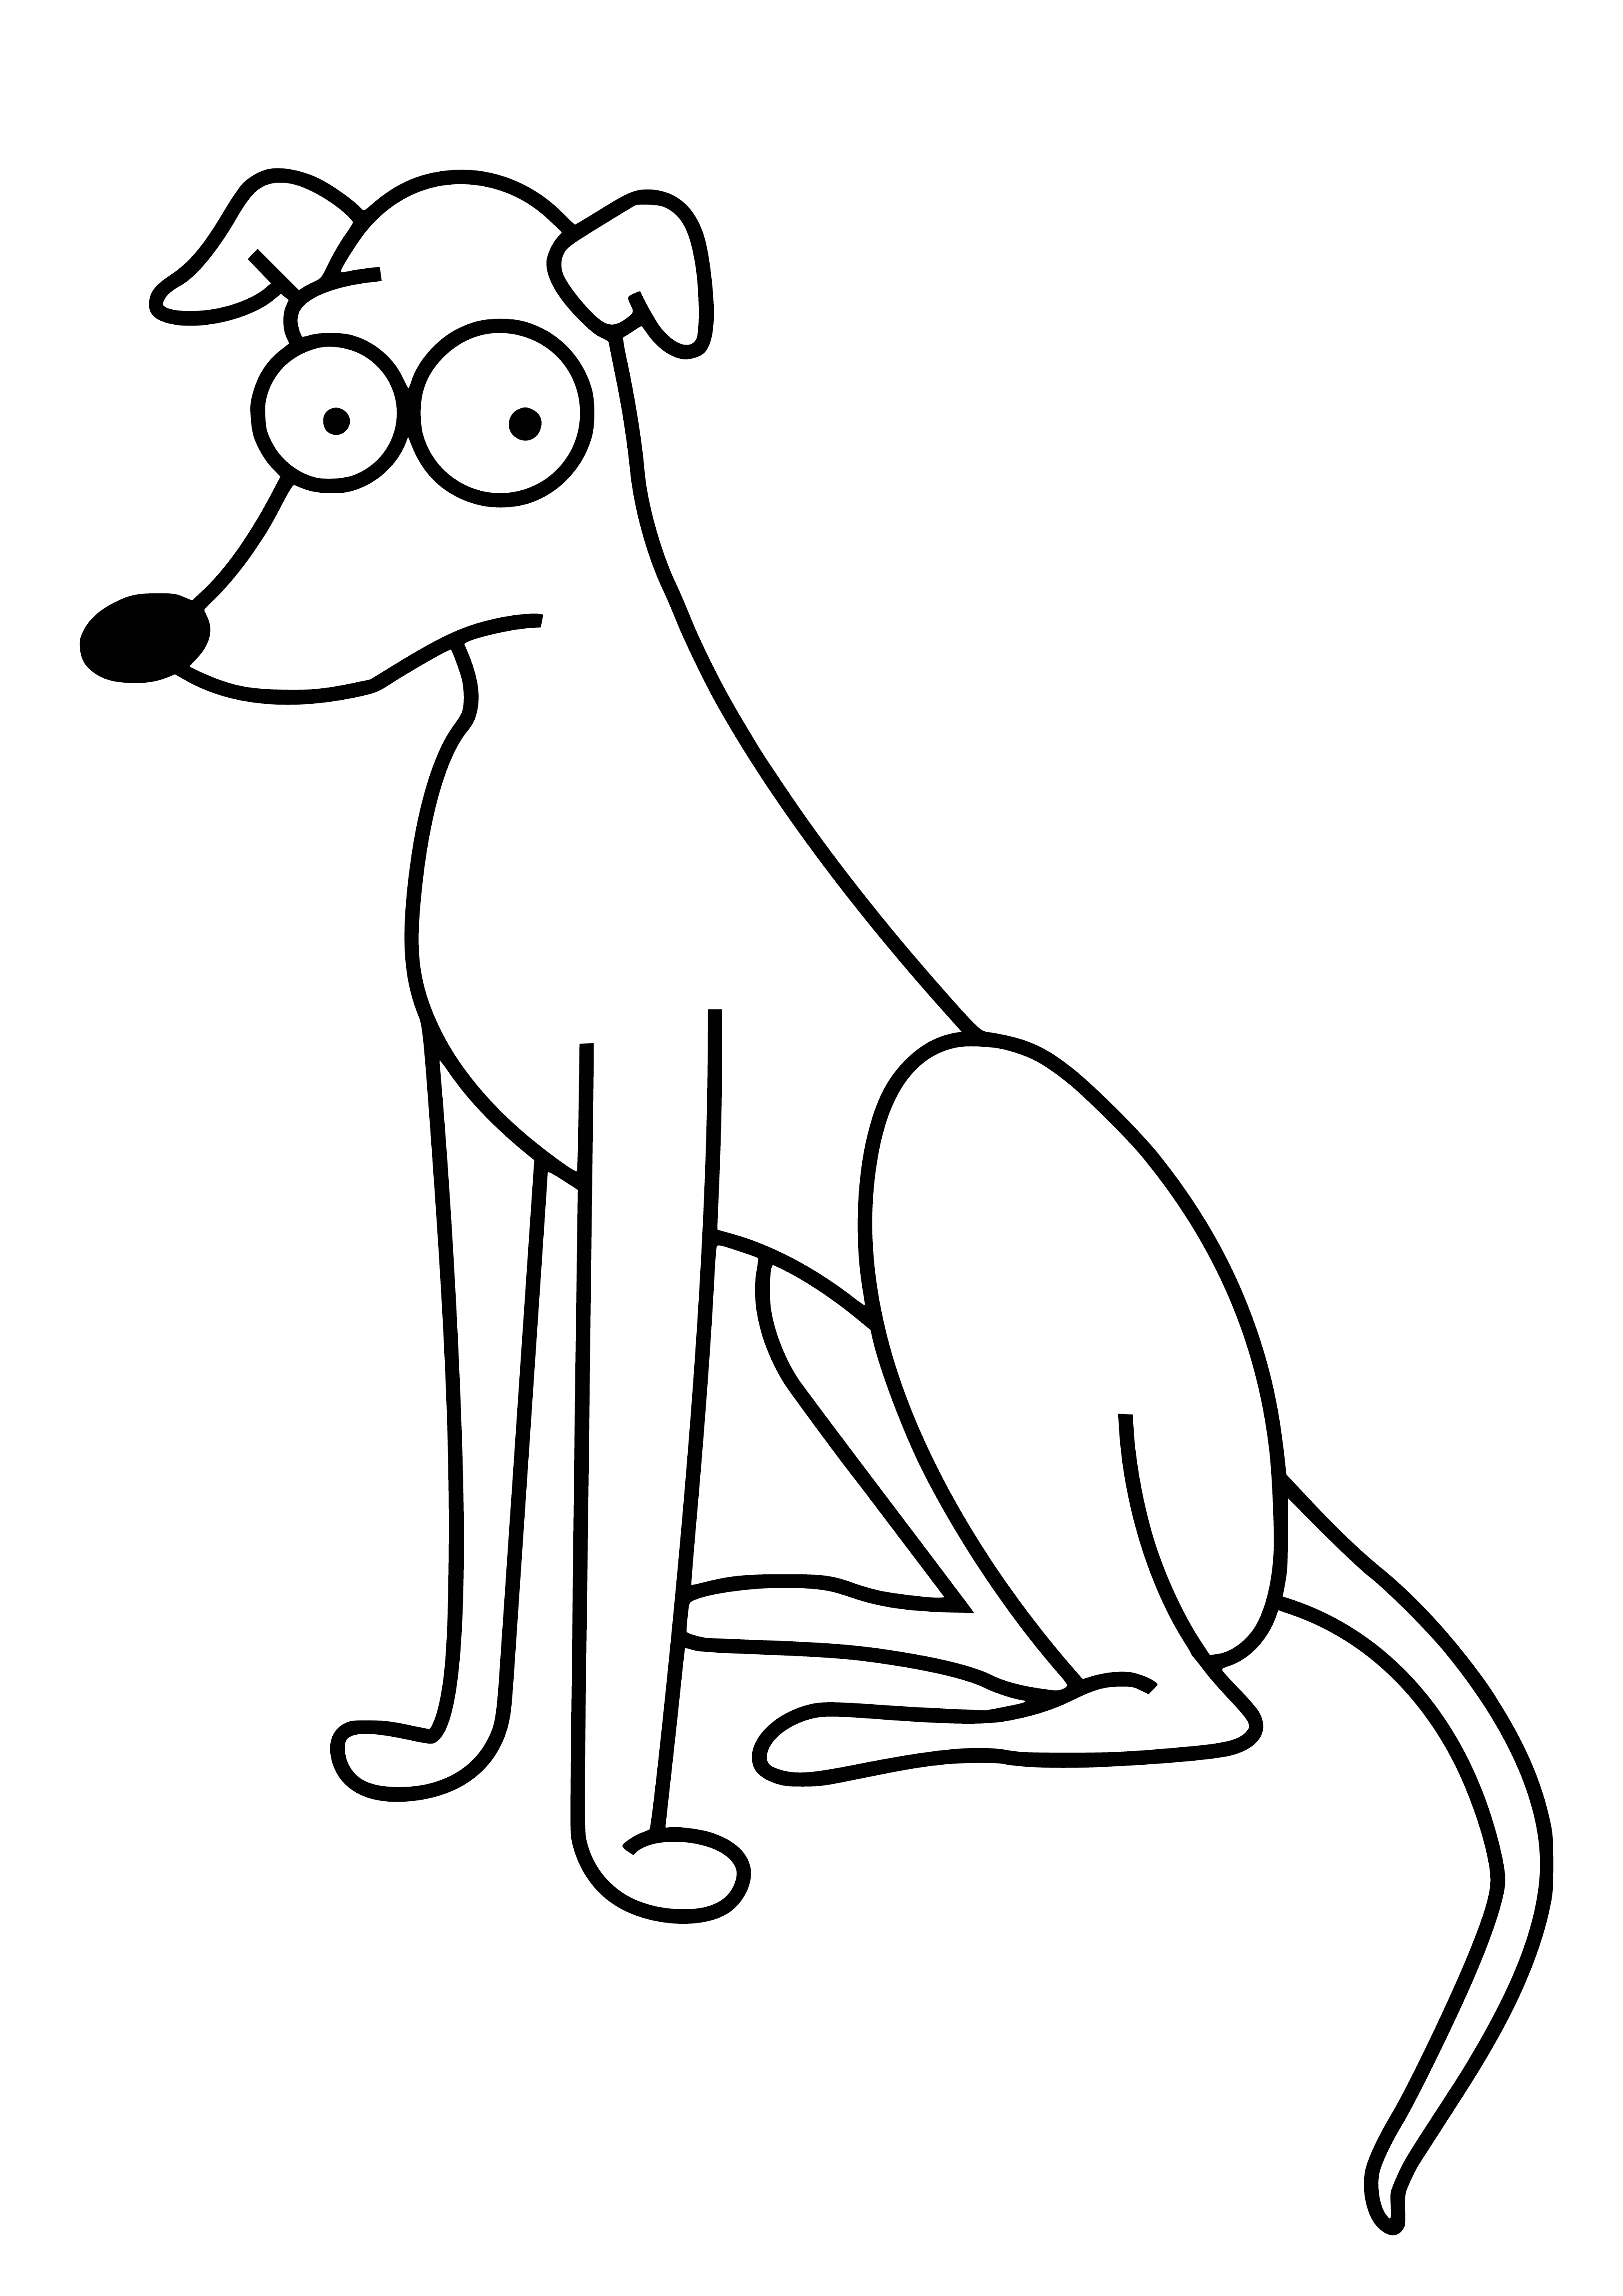 coloring page: Coloring page of a brown dog with black collar lying down on white floor.